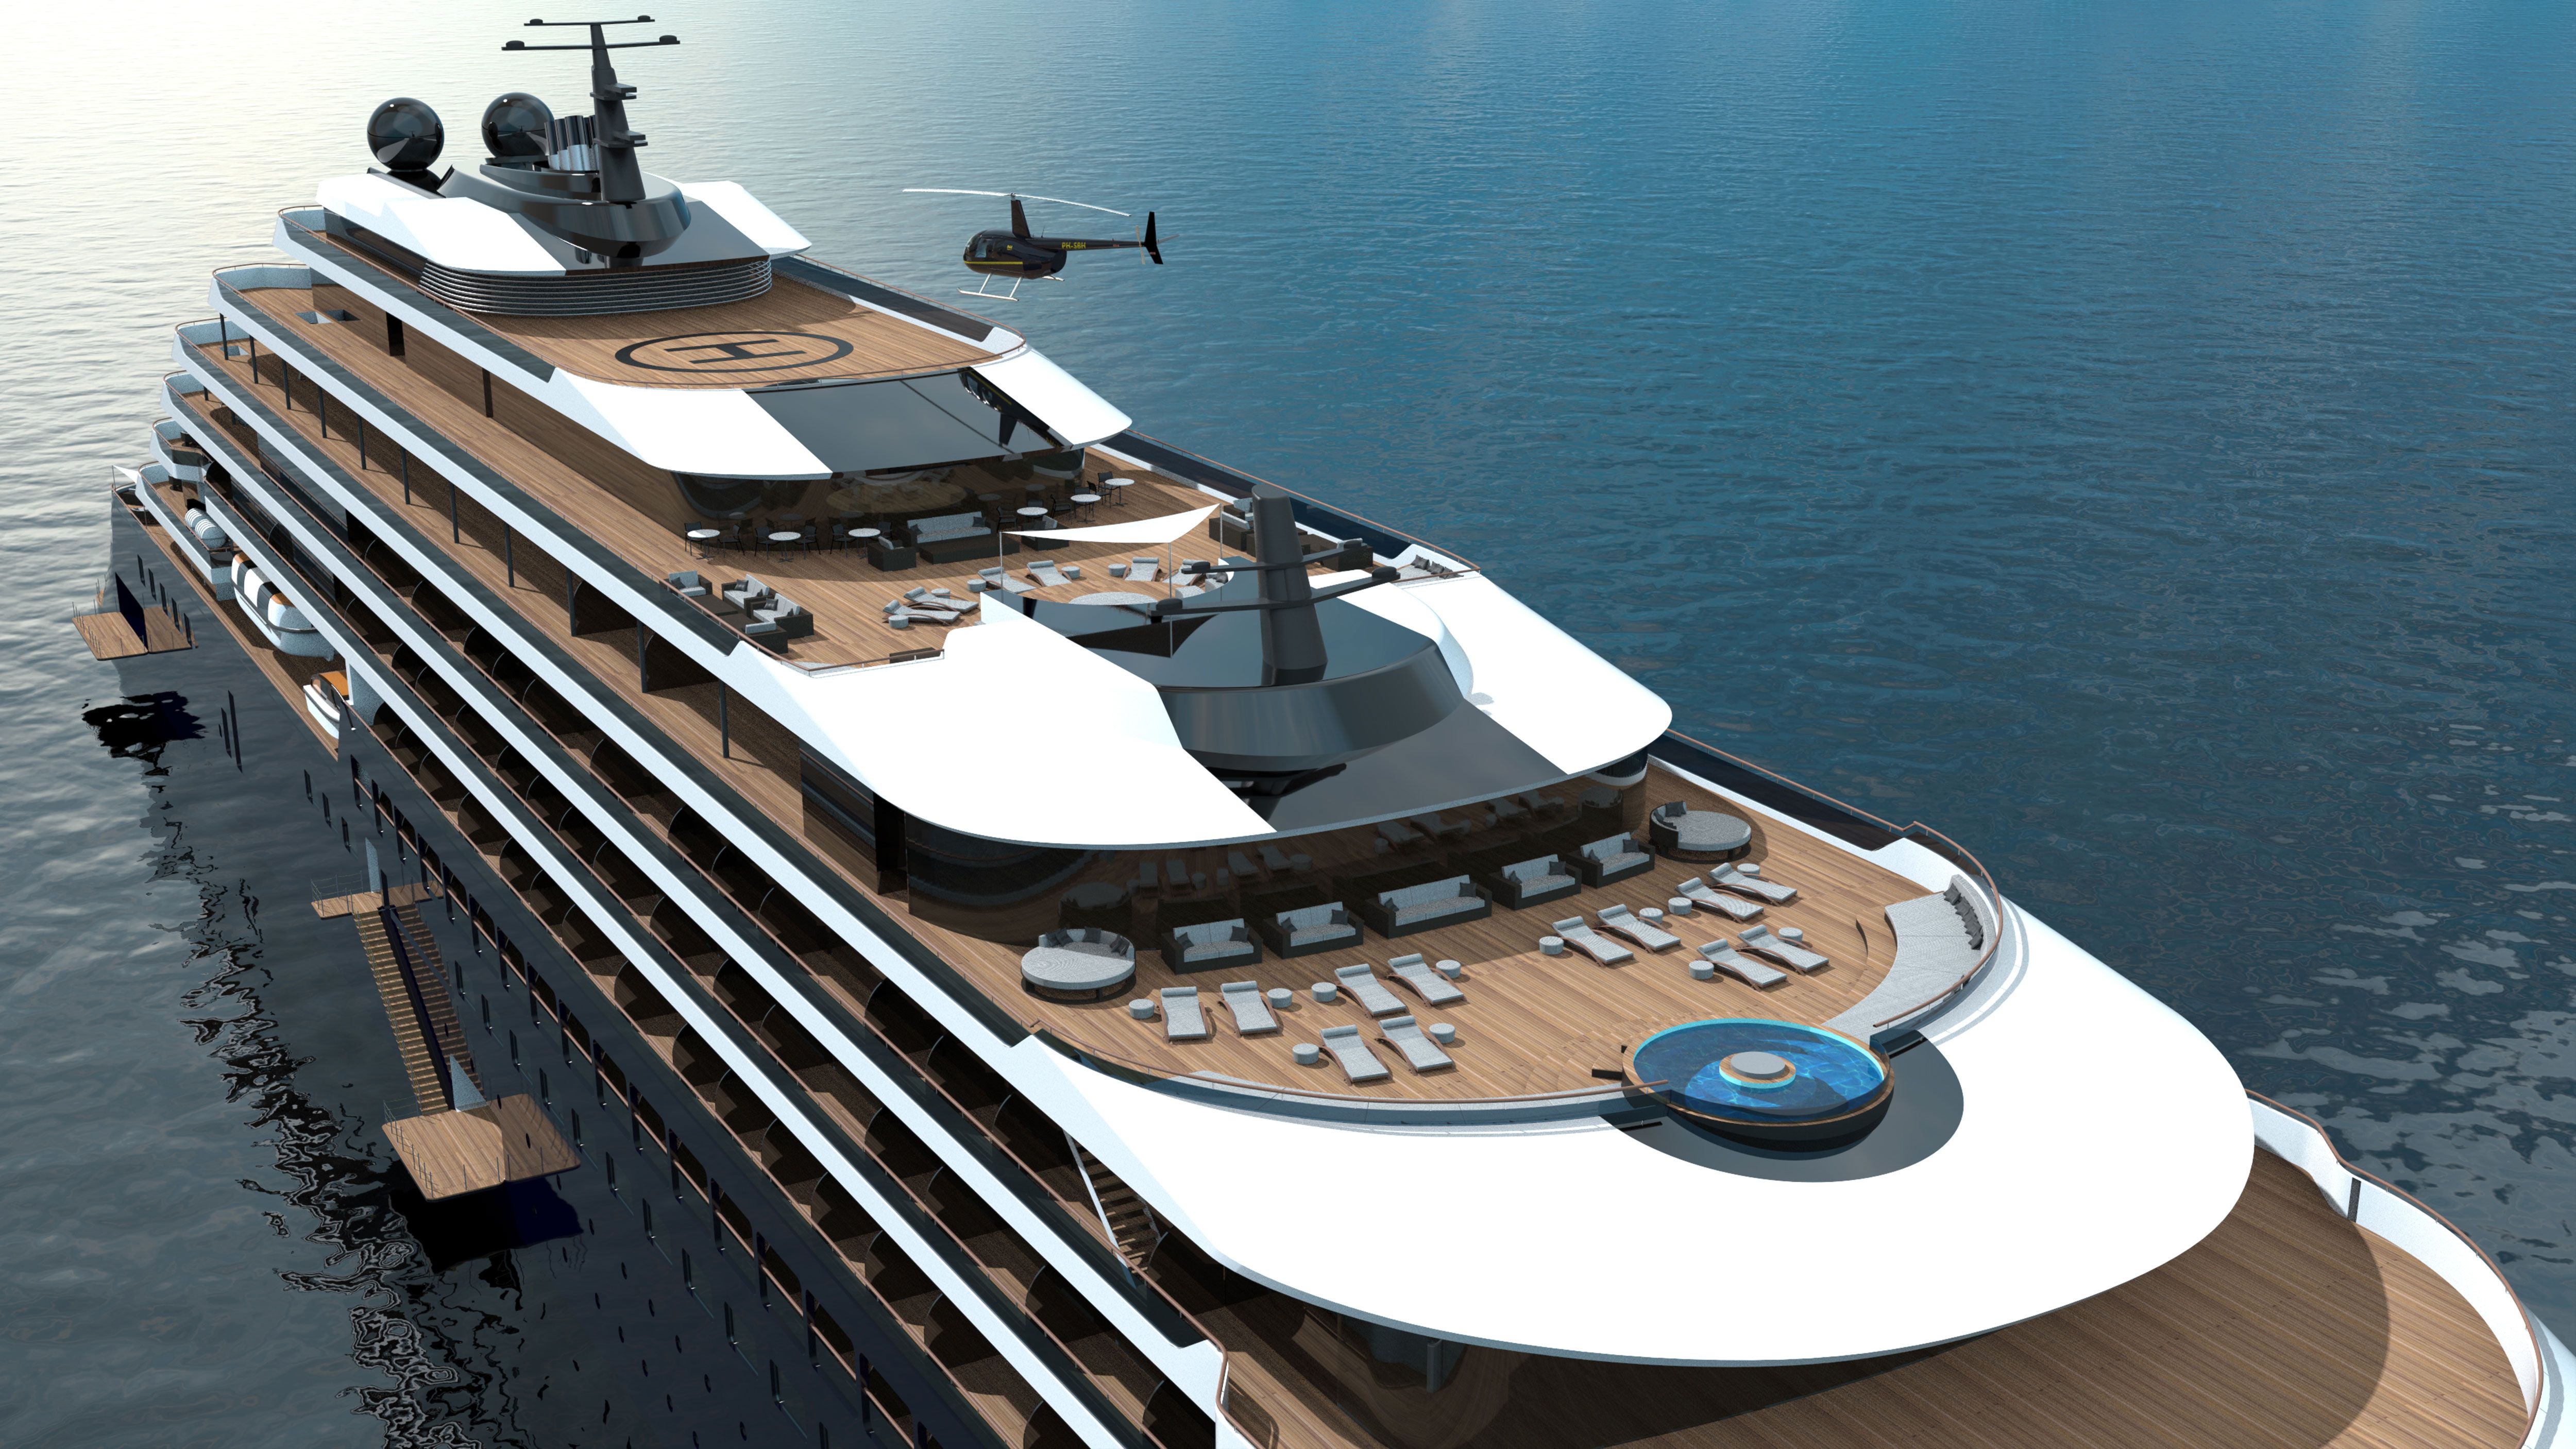 Ritz-Carlton's new yachts will be luxury hotels at sea